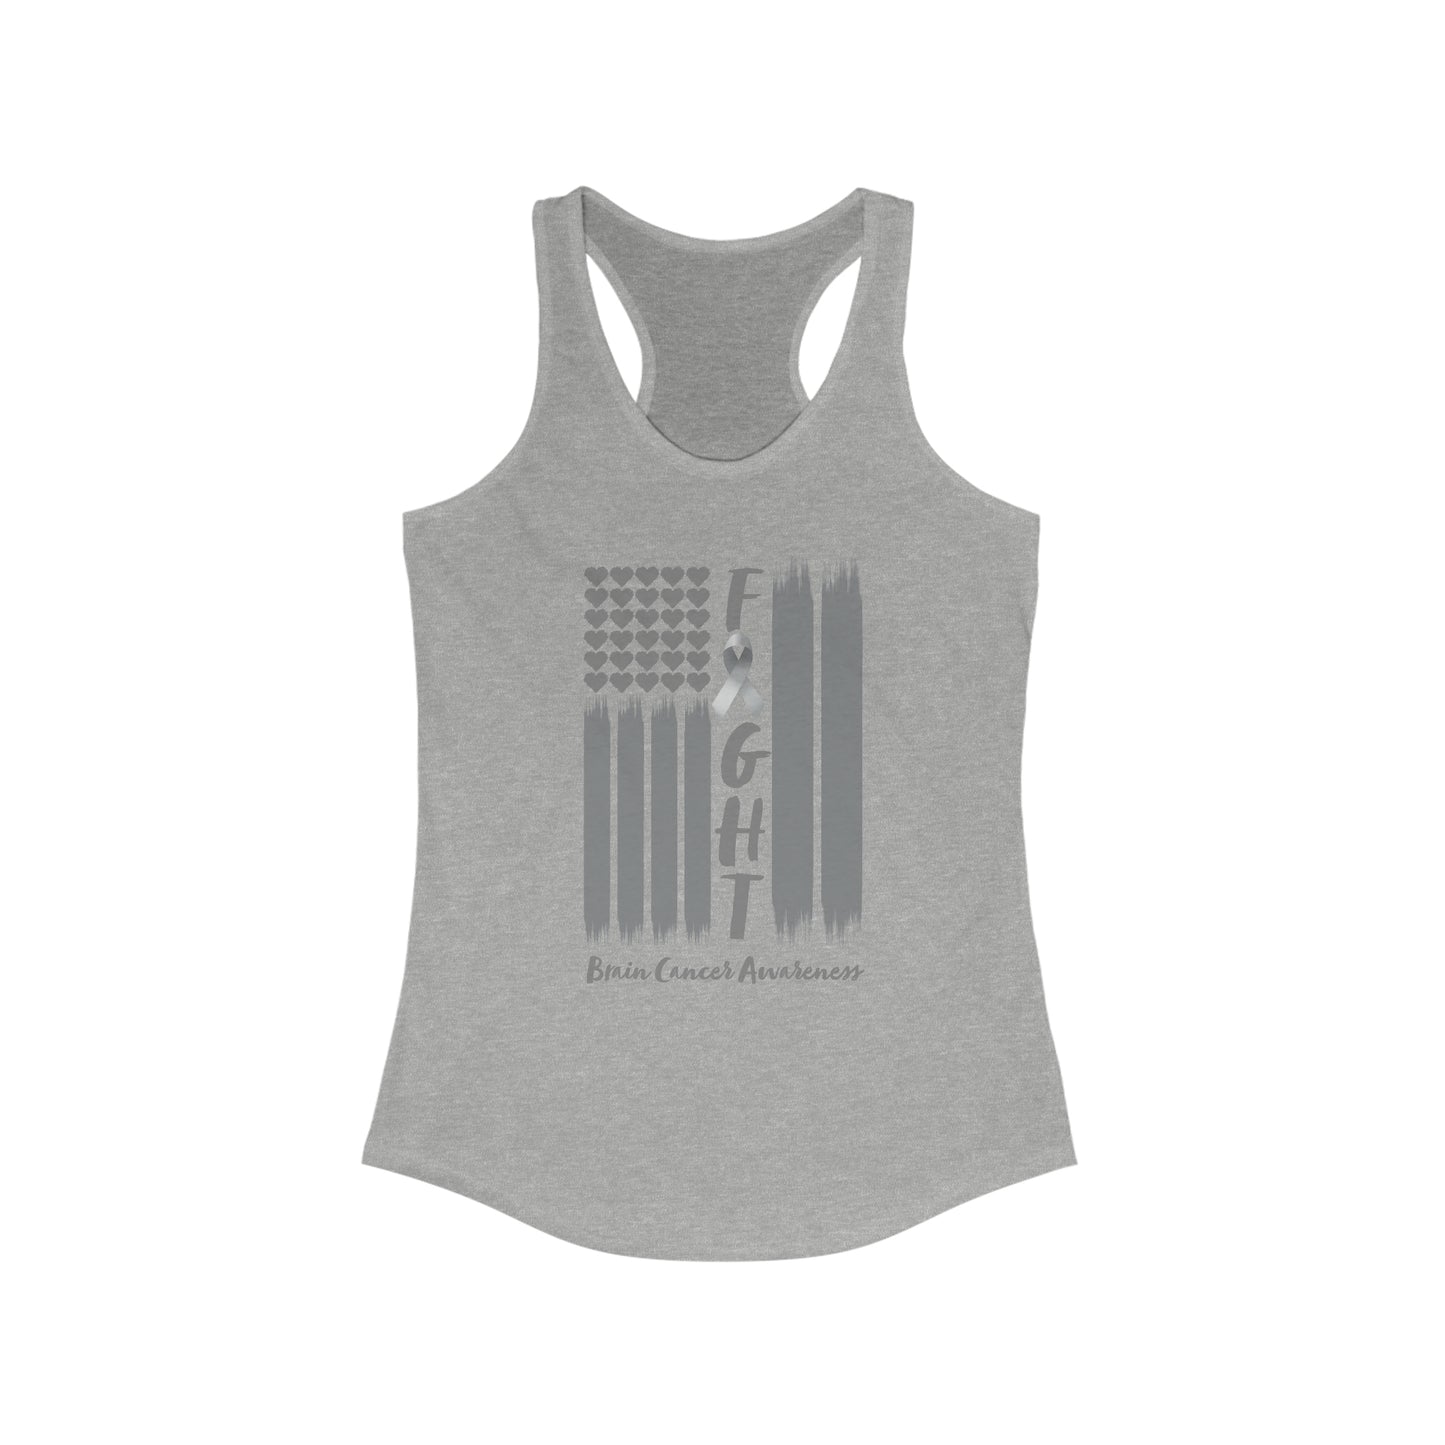 Brain Cancer Awareness Tank Top For Fight Cancer Flag